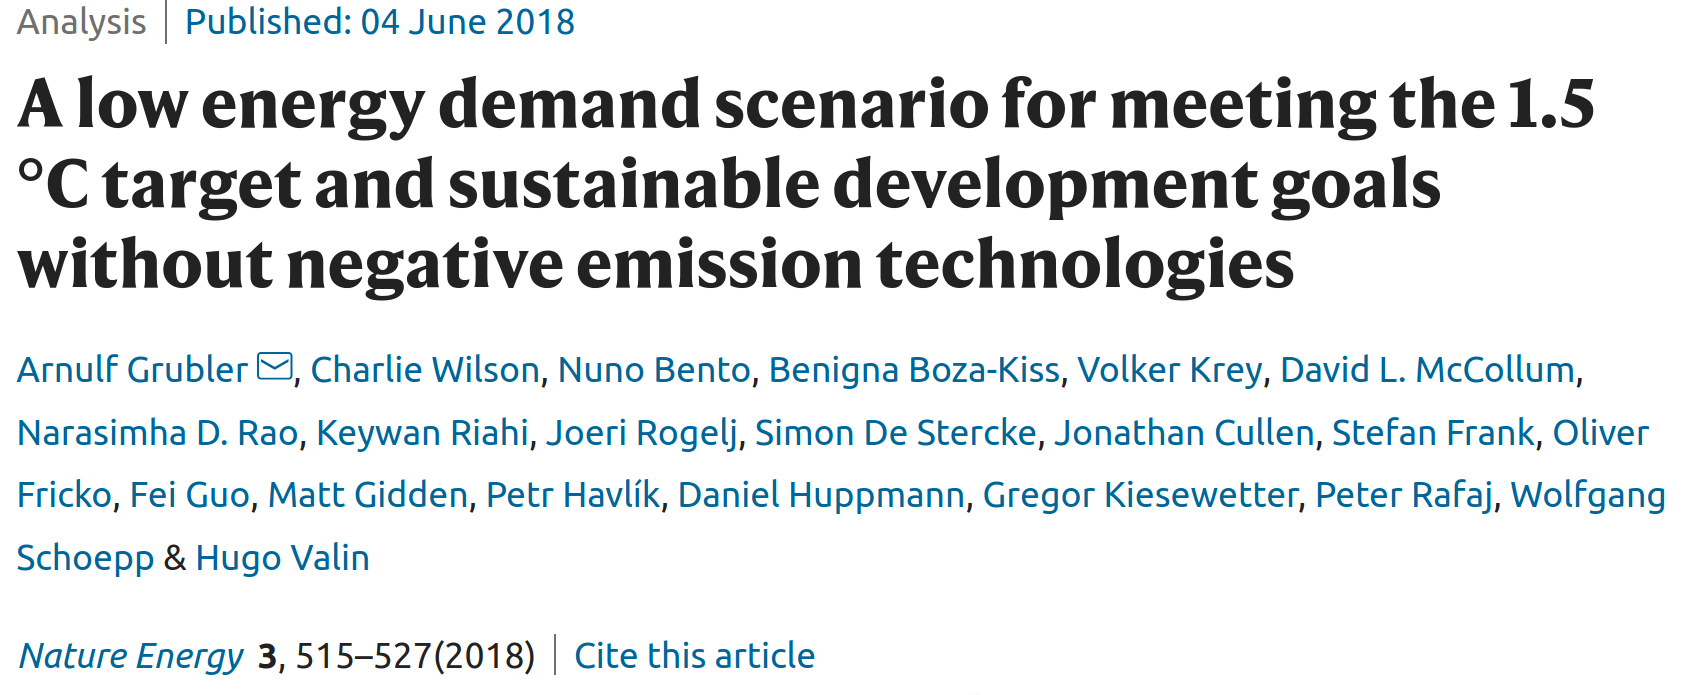 A low
		   energy demand scenario for meeting the 1.5 °C target and
		   sustainable development goals without negative emission
		   technologies.